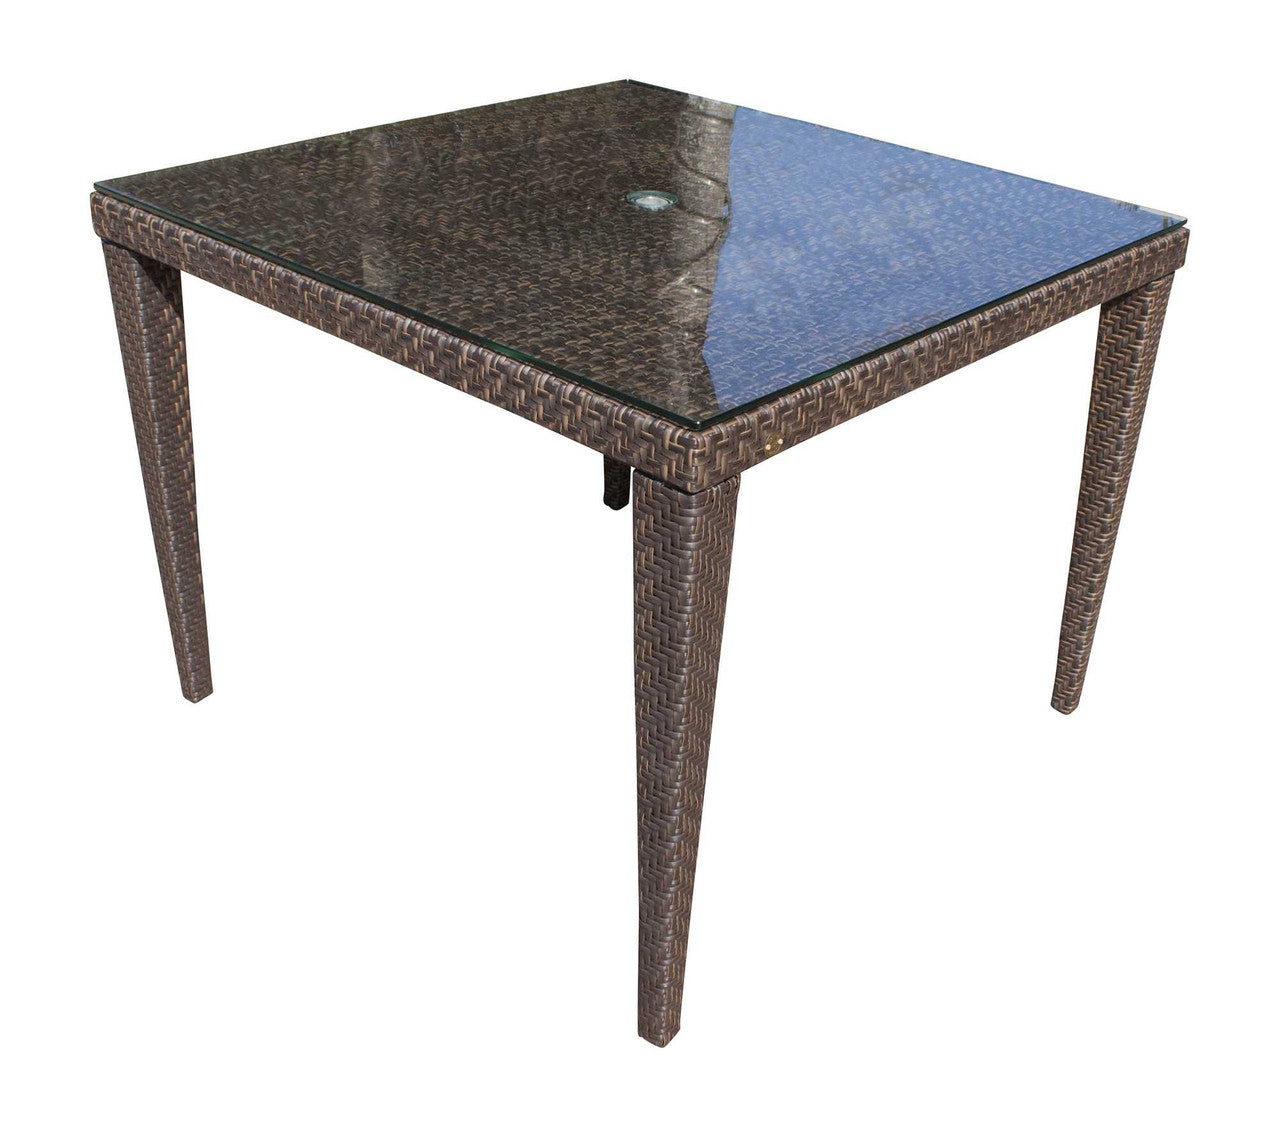 Hospitality Rattan Soho Patio Woven Square 40" Dining Table with Glass